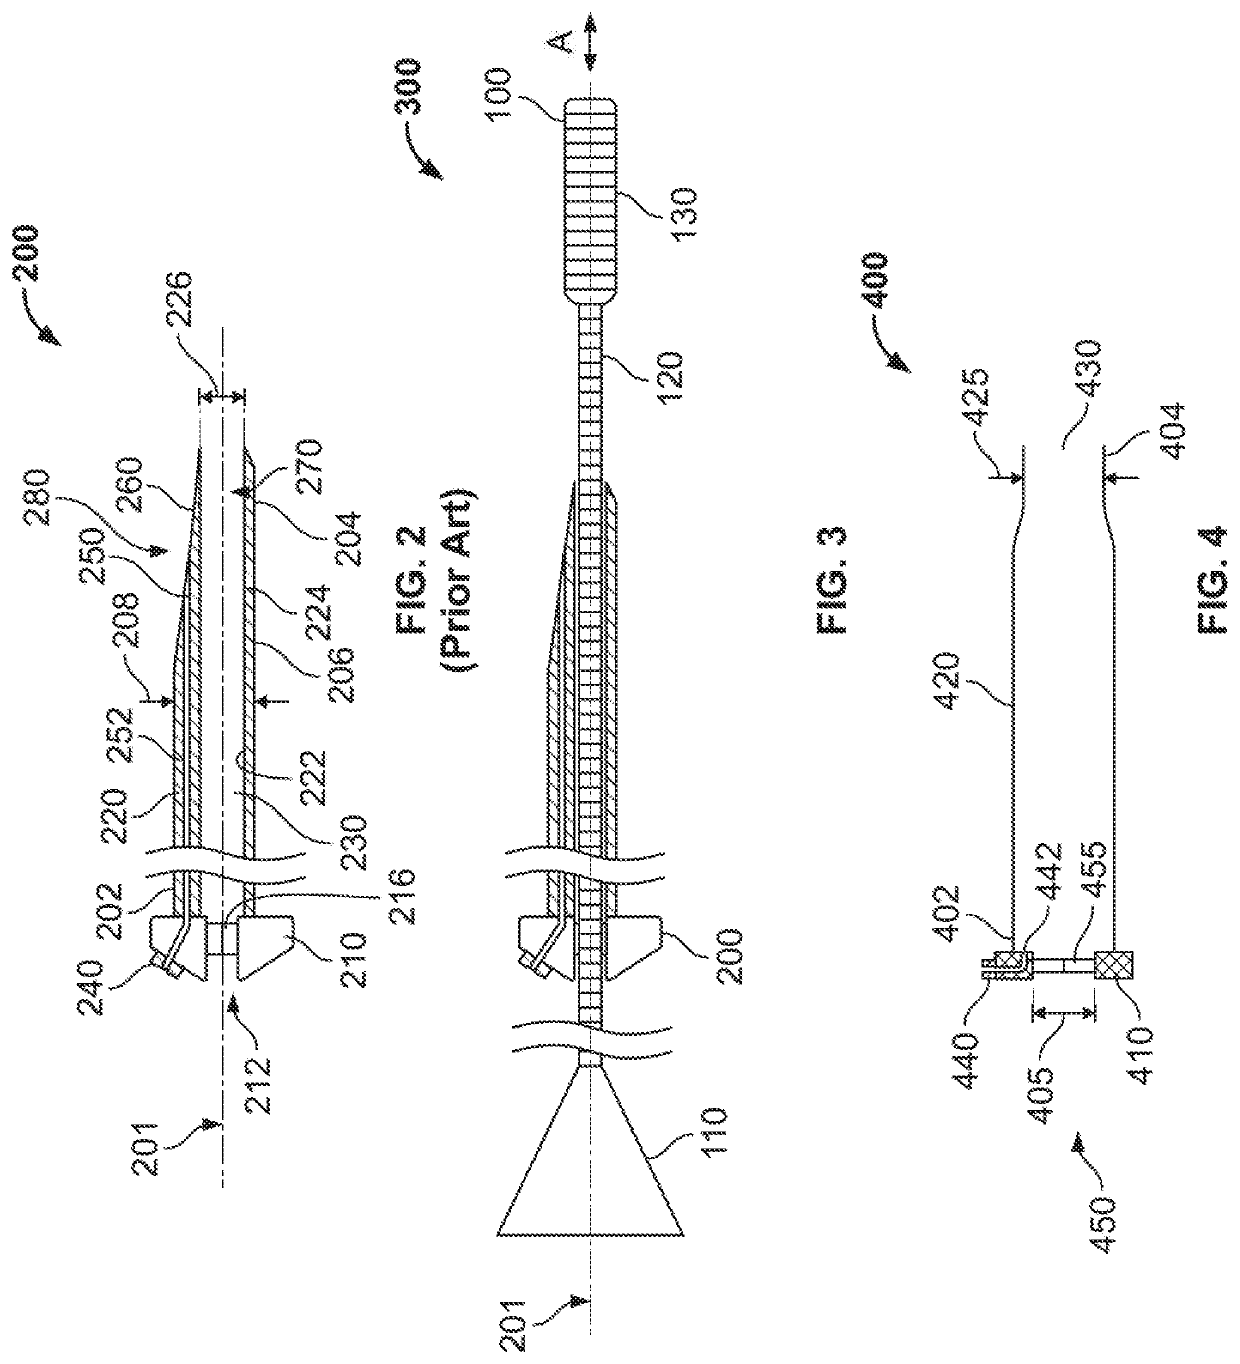 Integrated expandable access for medical device introducer